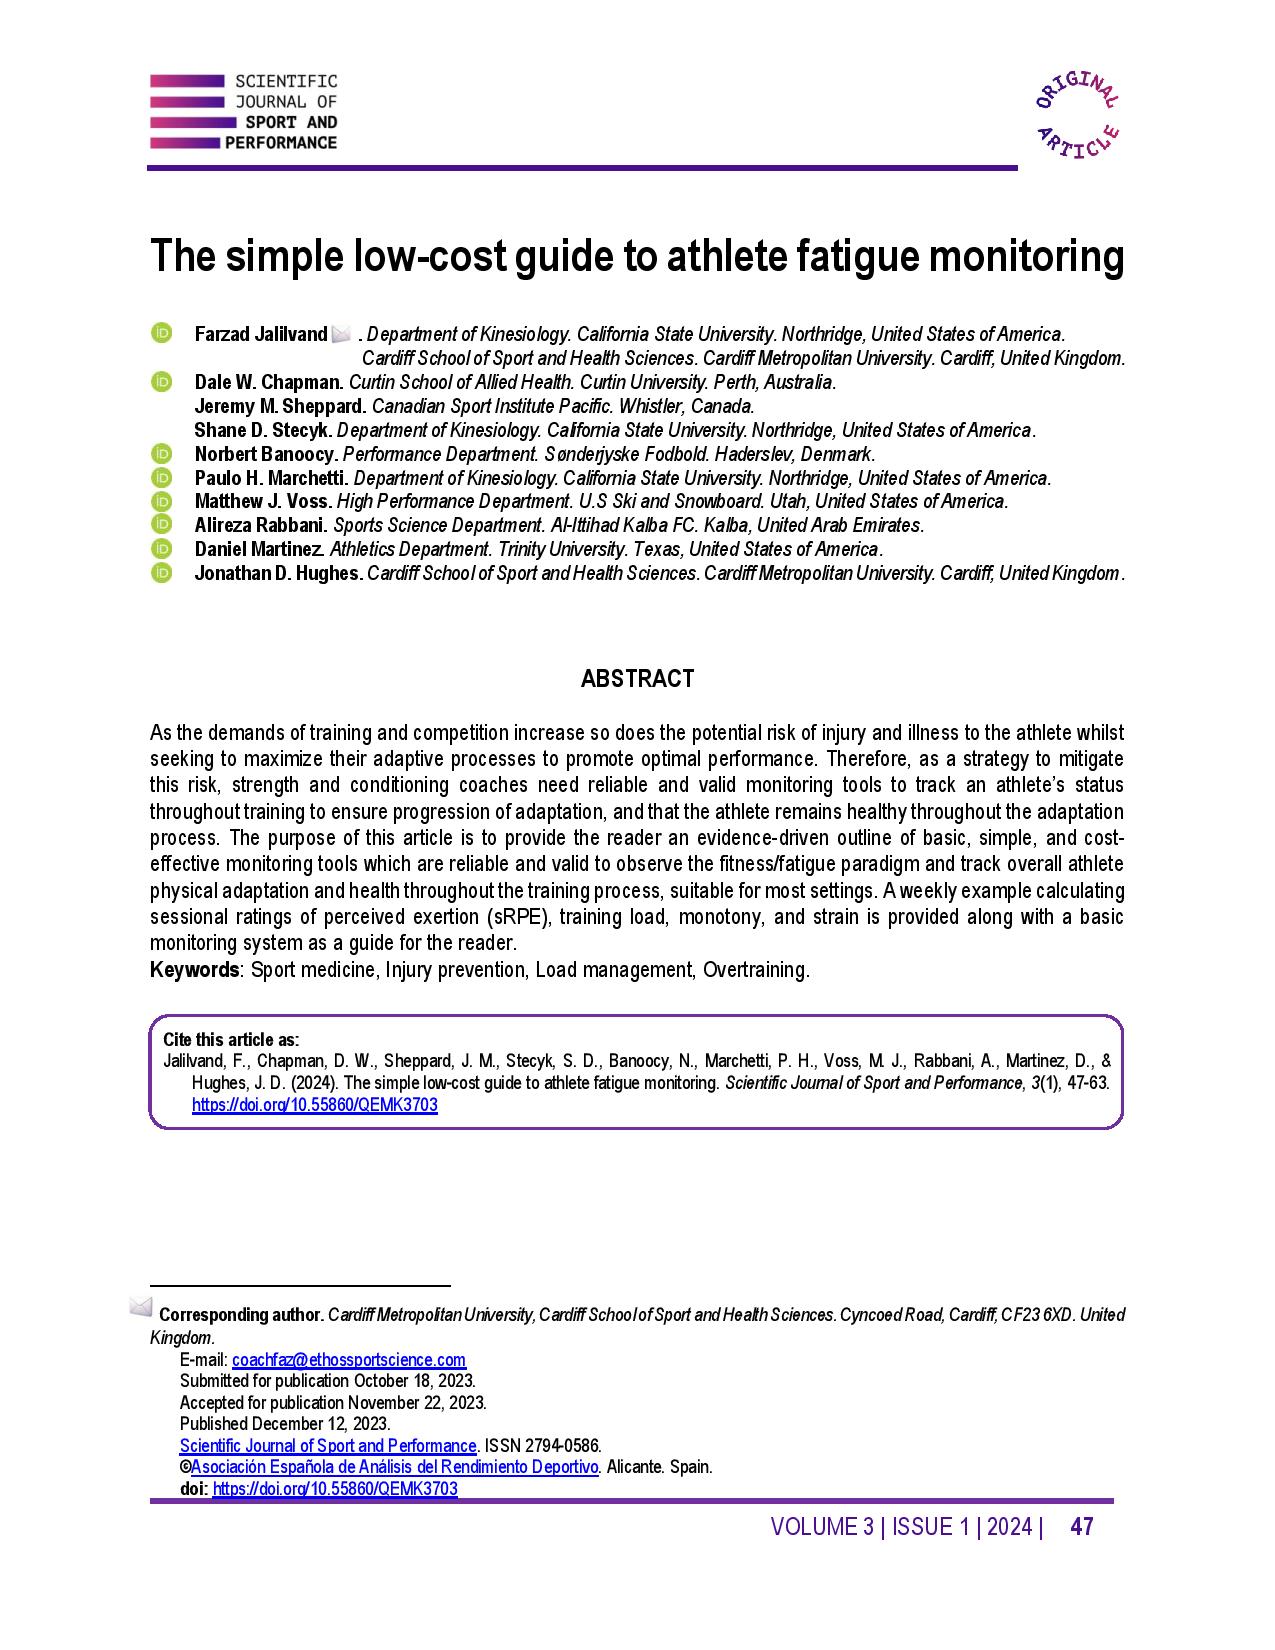 The simple low-cost guide to athlete fatigue monitoring